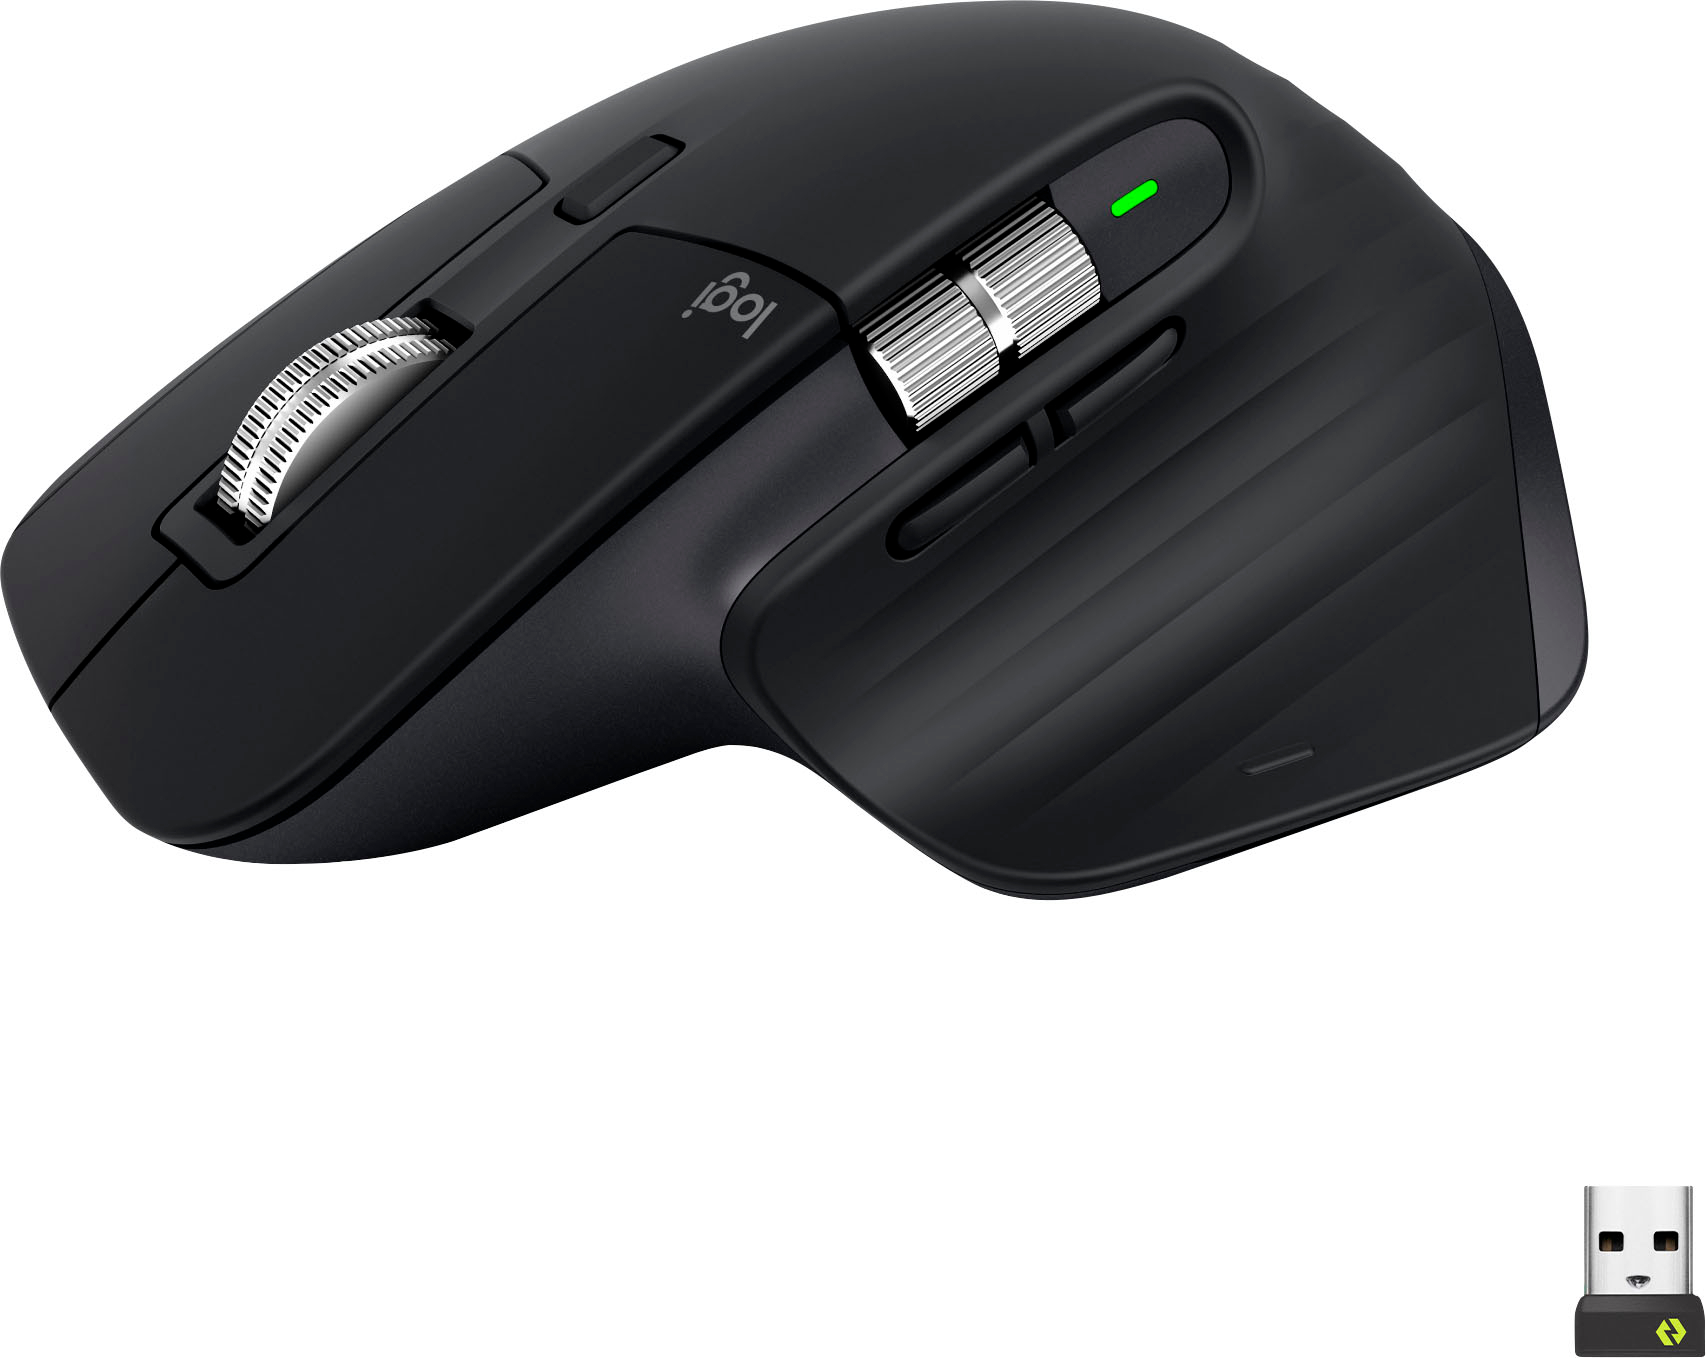 logitech vs microsoft mouse: What You Need to Know Before Buying